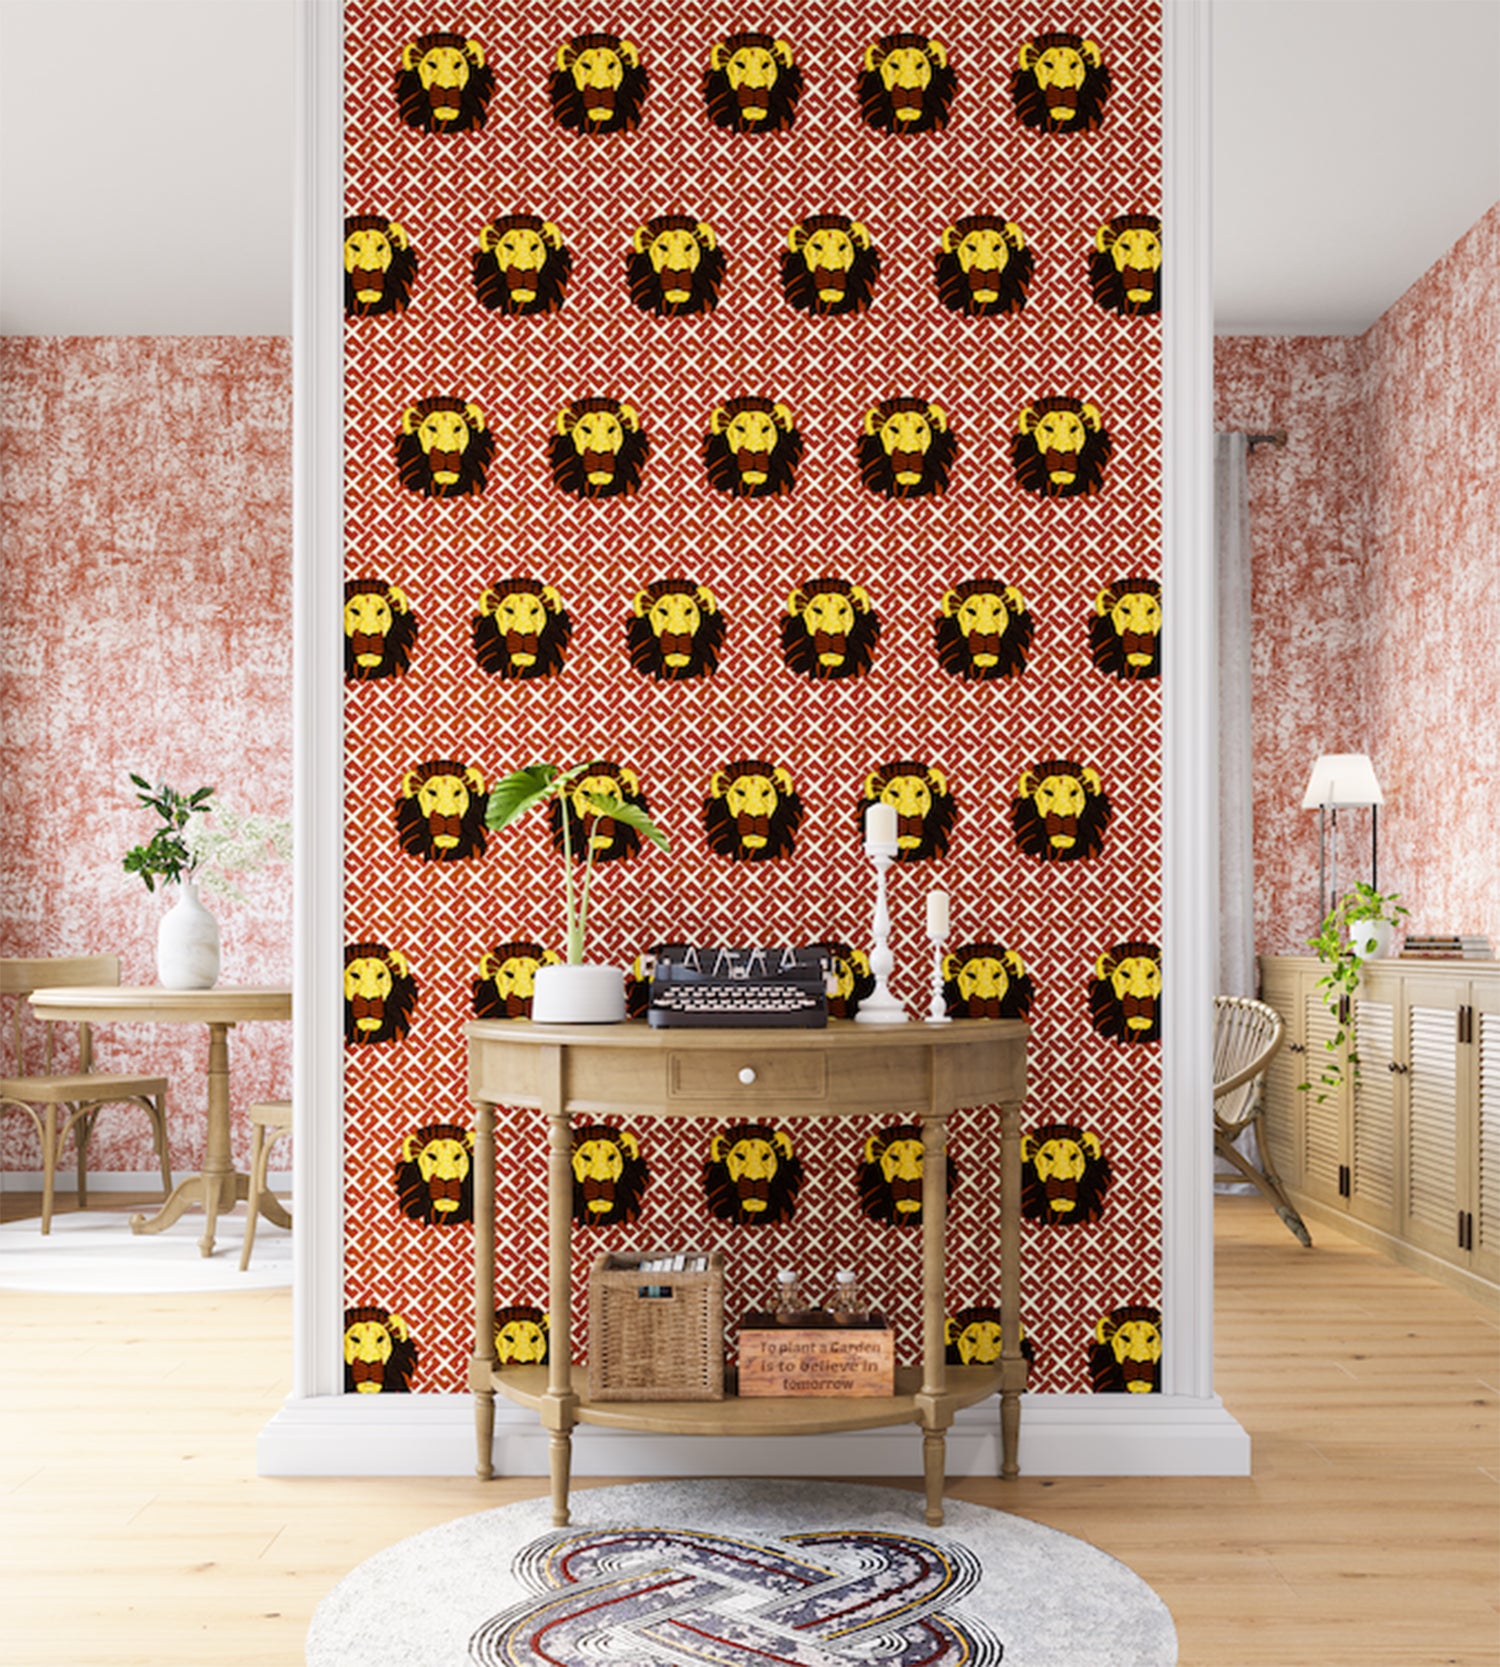 A maximalist living space with an accent wall papered in a repeating lion face pattern in red, yellow and brown.